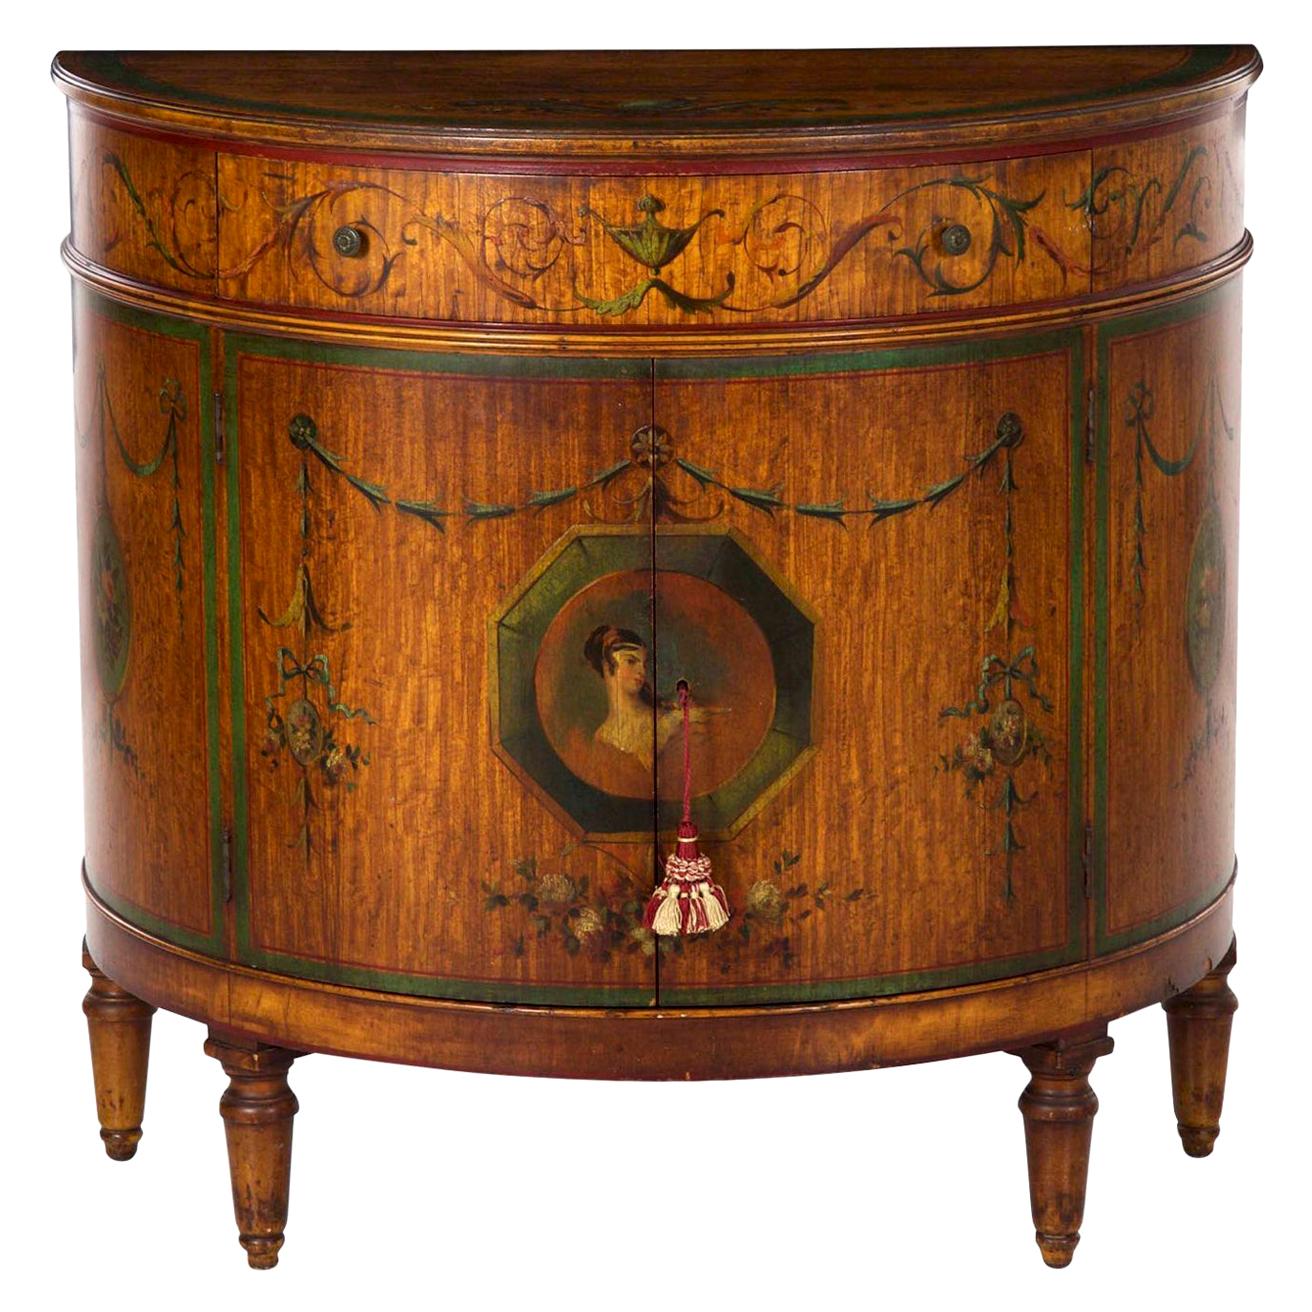 Adam's Style Finely Painted Demilune Antique Cabinet by William F. Wholey Co.